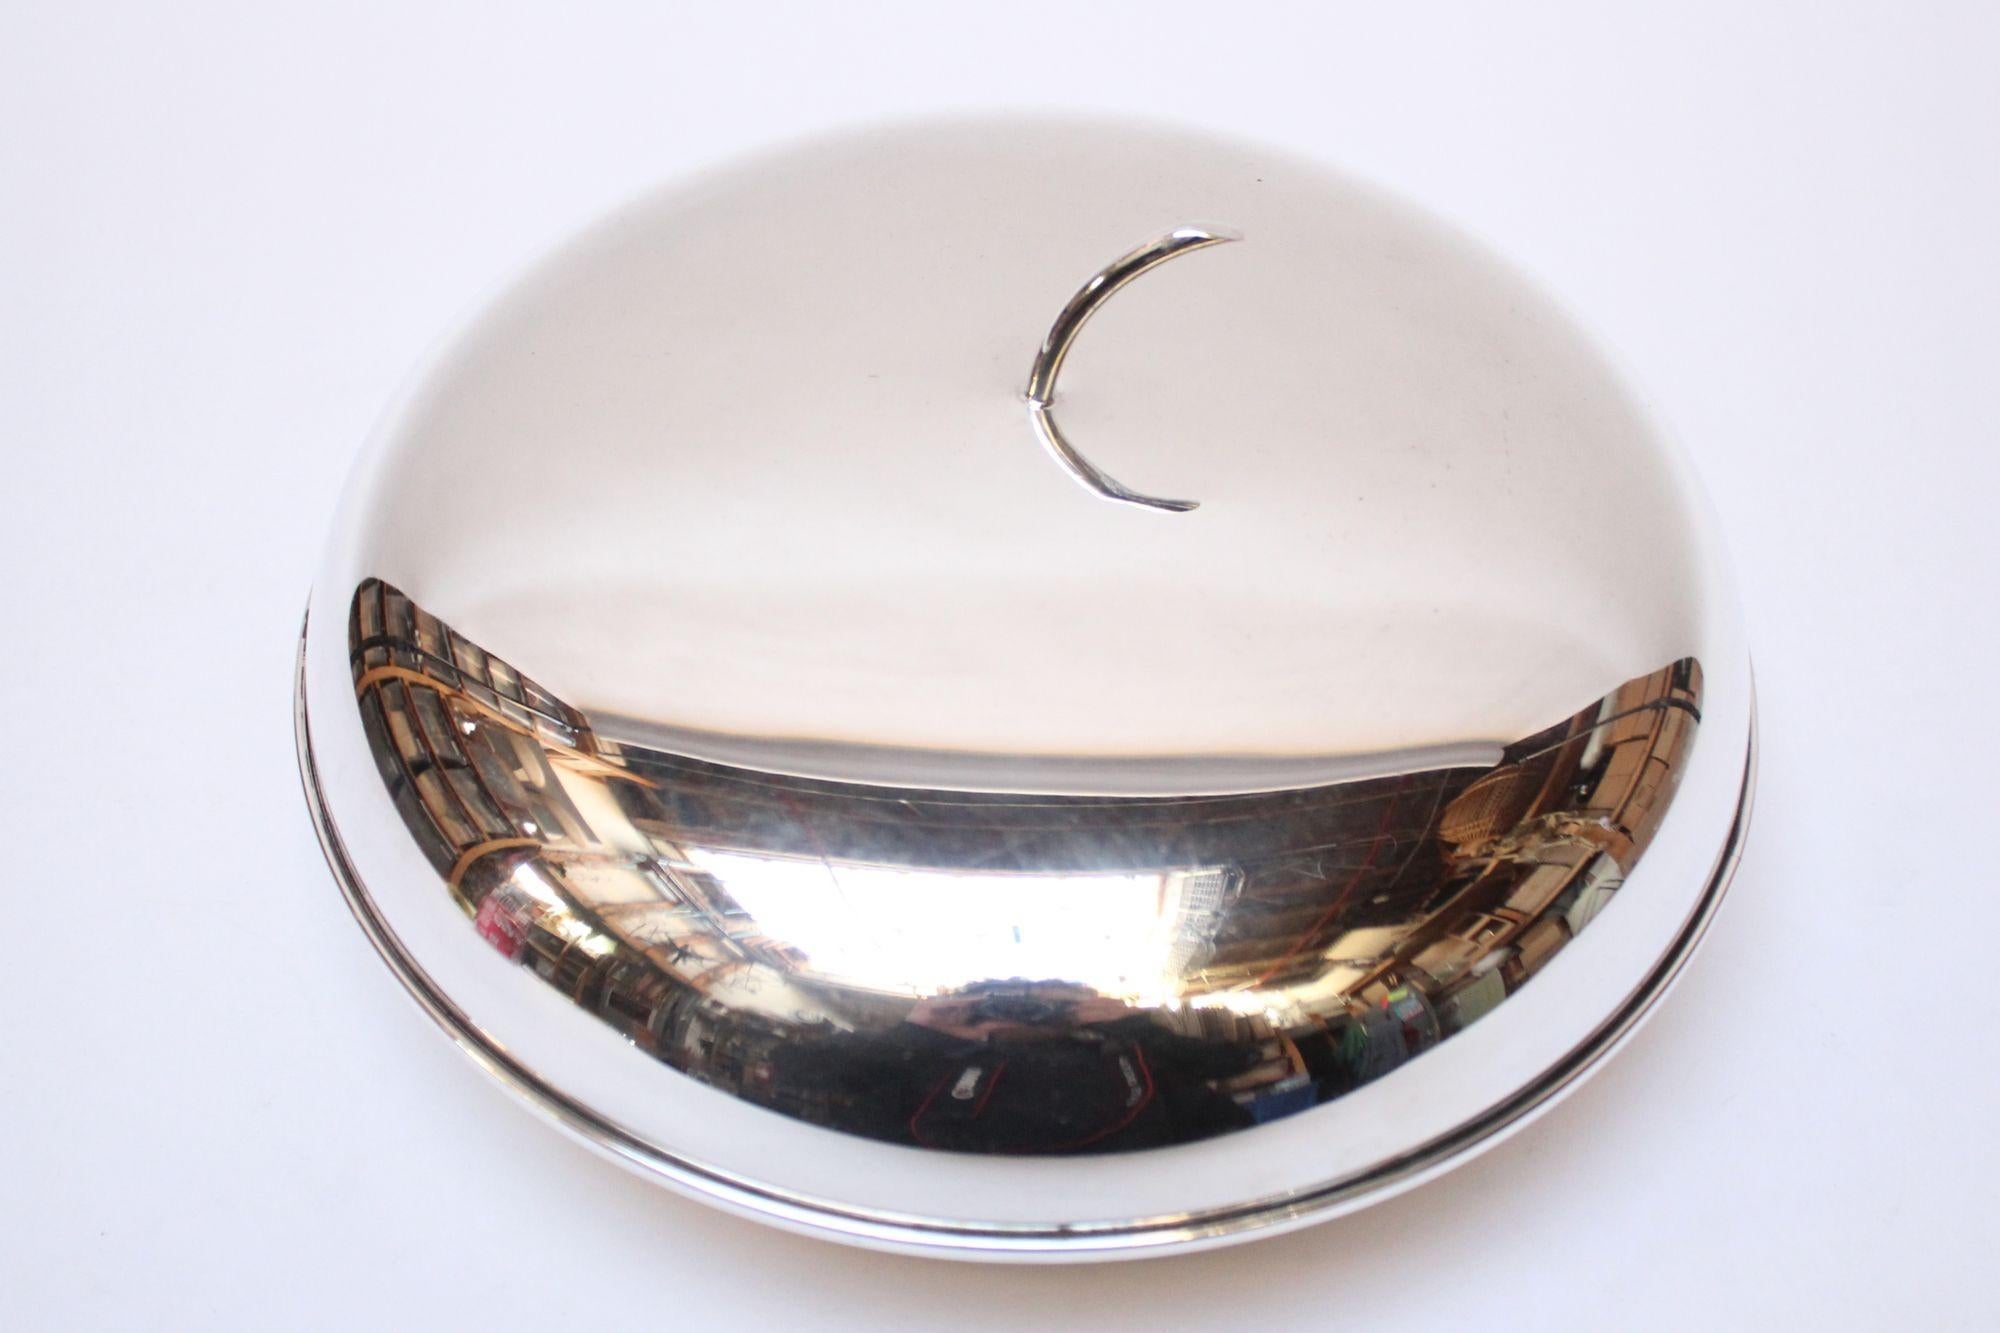 Italian silver-plated round snack/candy/serving dish with lidded top (ca. 1960s, Italy).
This is a shorter, uninsulated version of fruit and vegetable-formed ice buckets made in Italy and France in the mid-20th century.
Though shallow, this piece